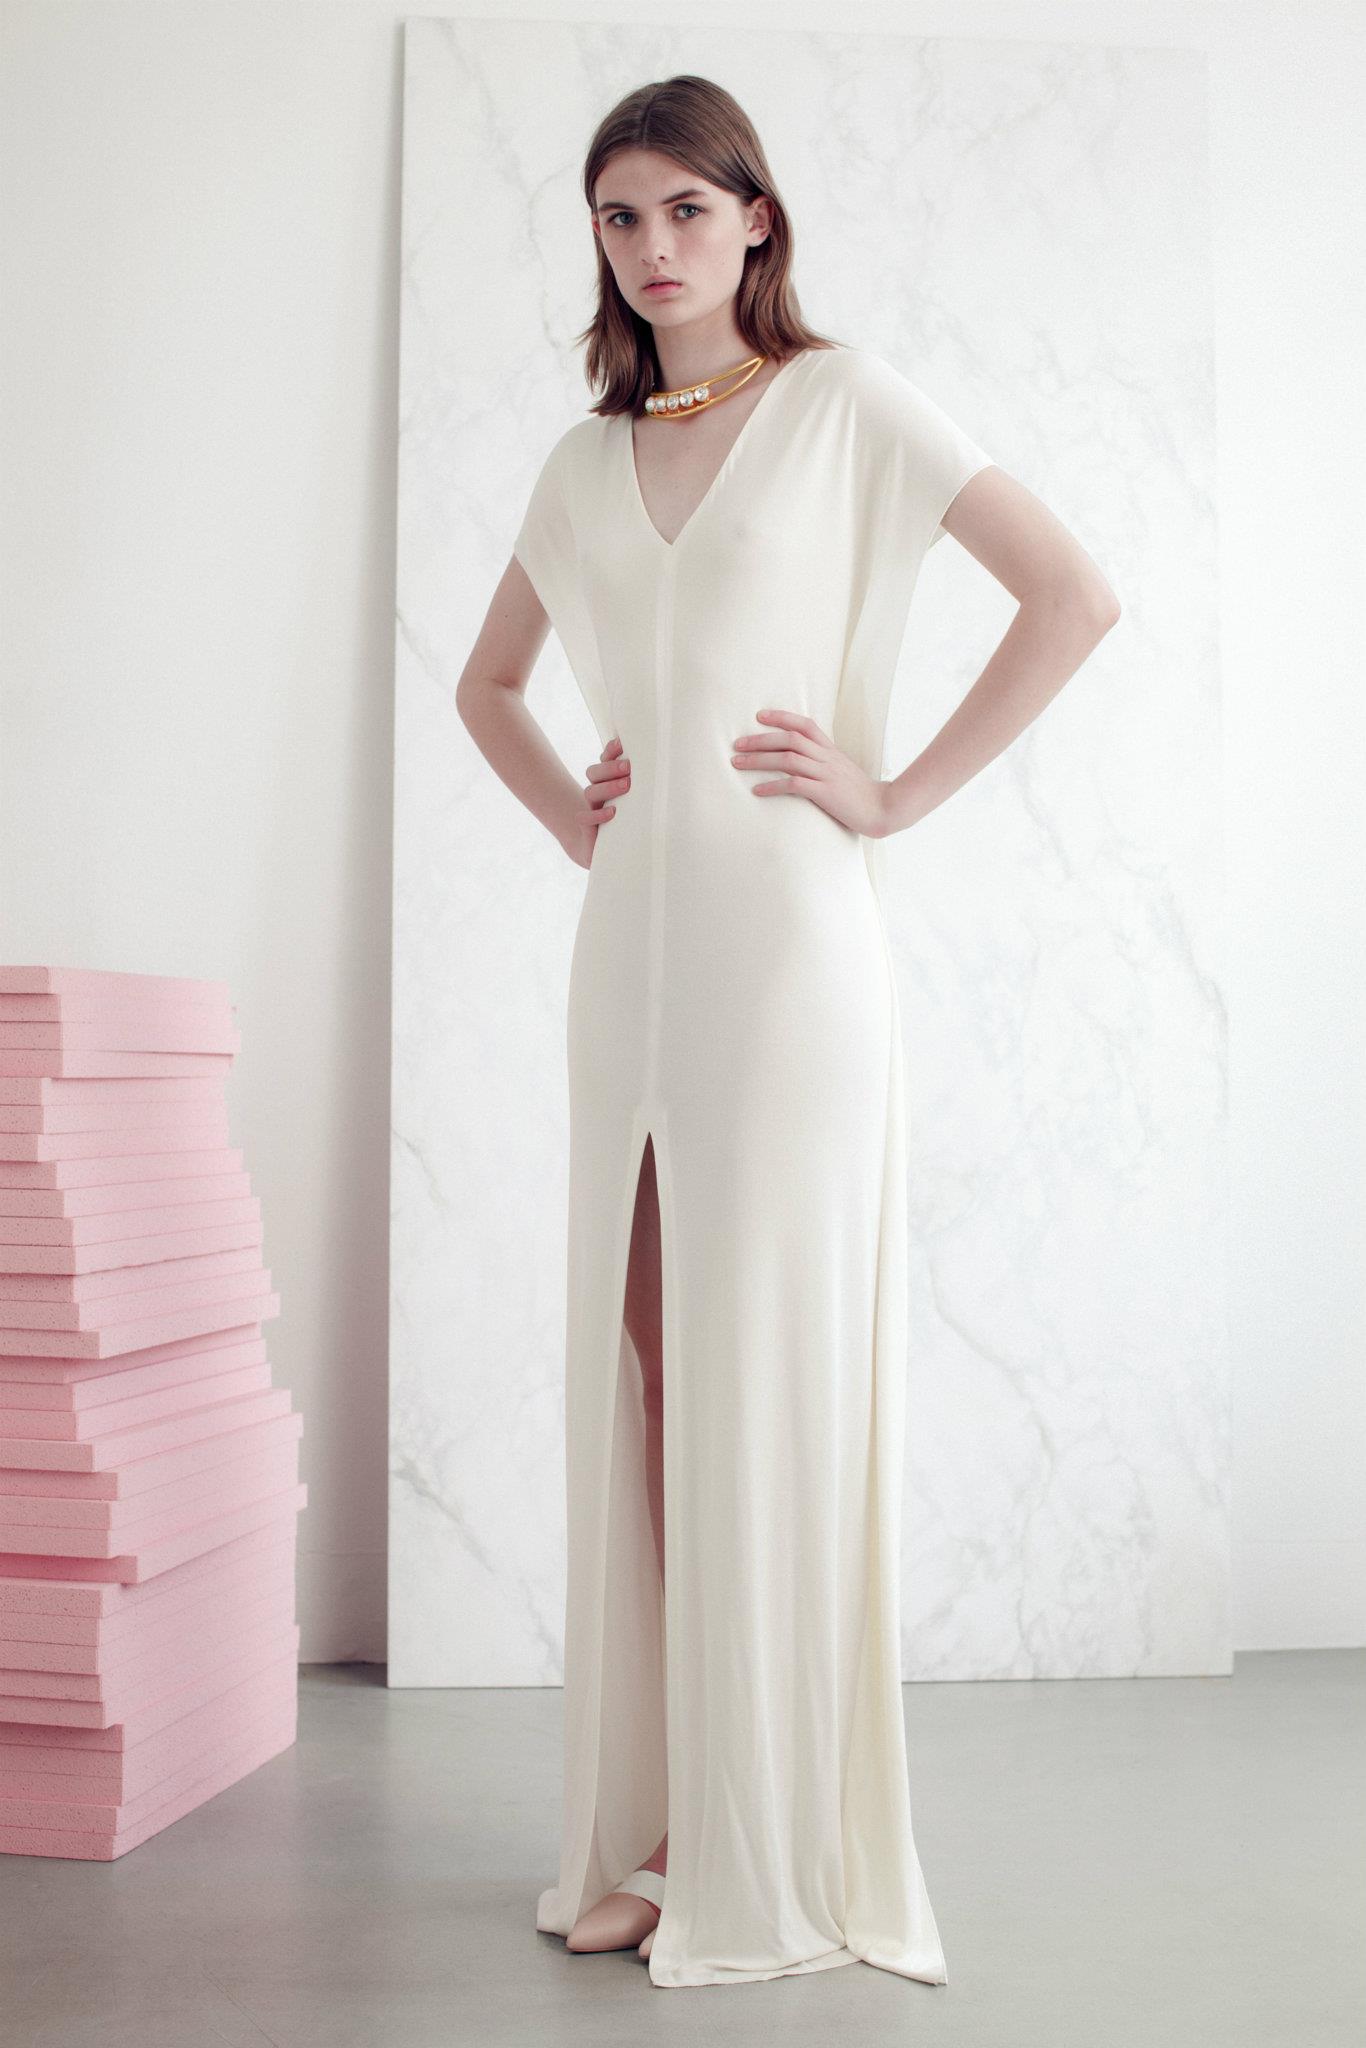 Vionnet Spring 2013 Collection 16